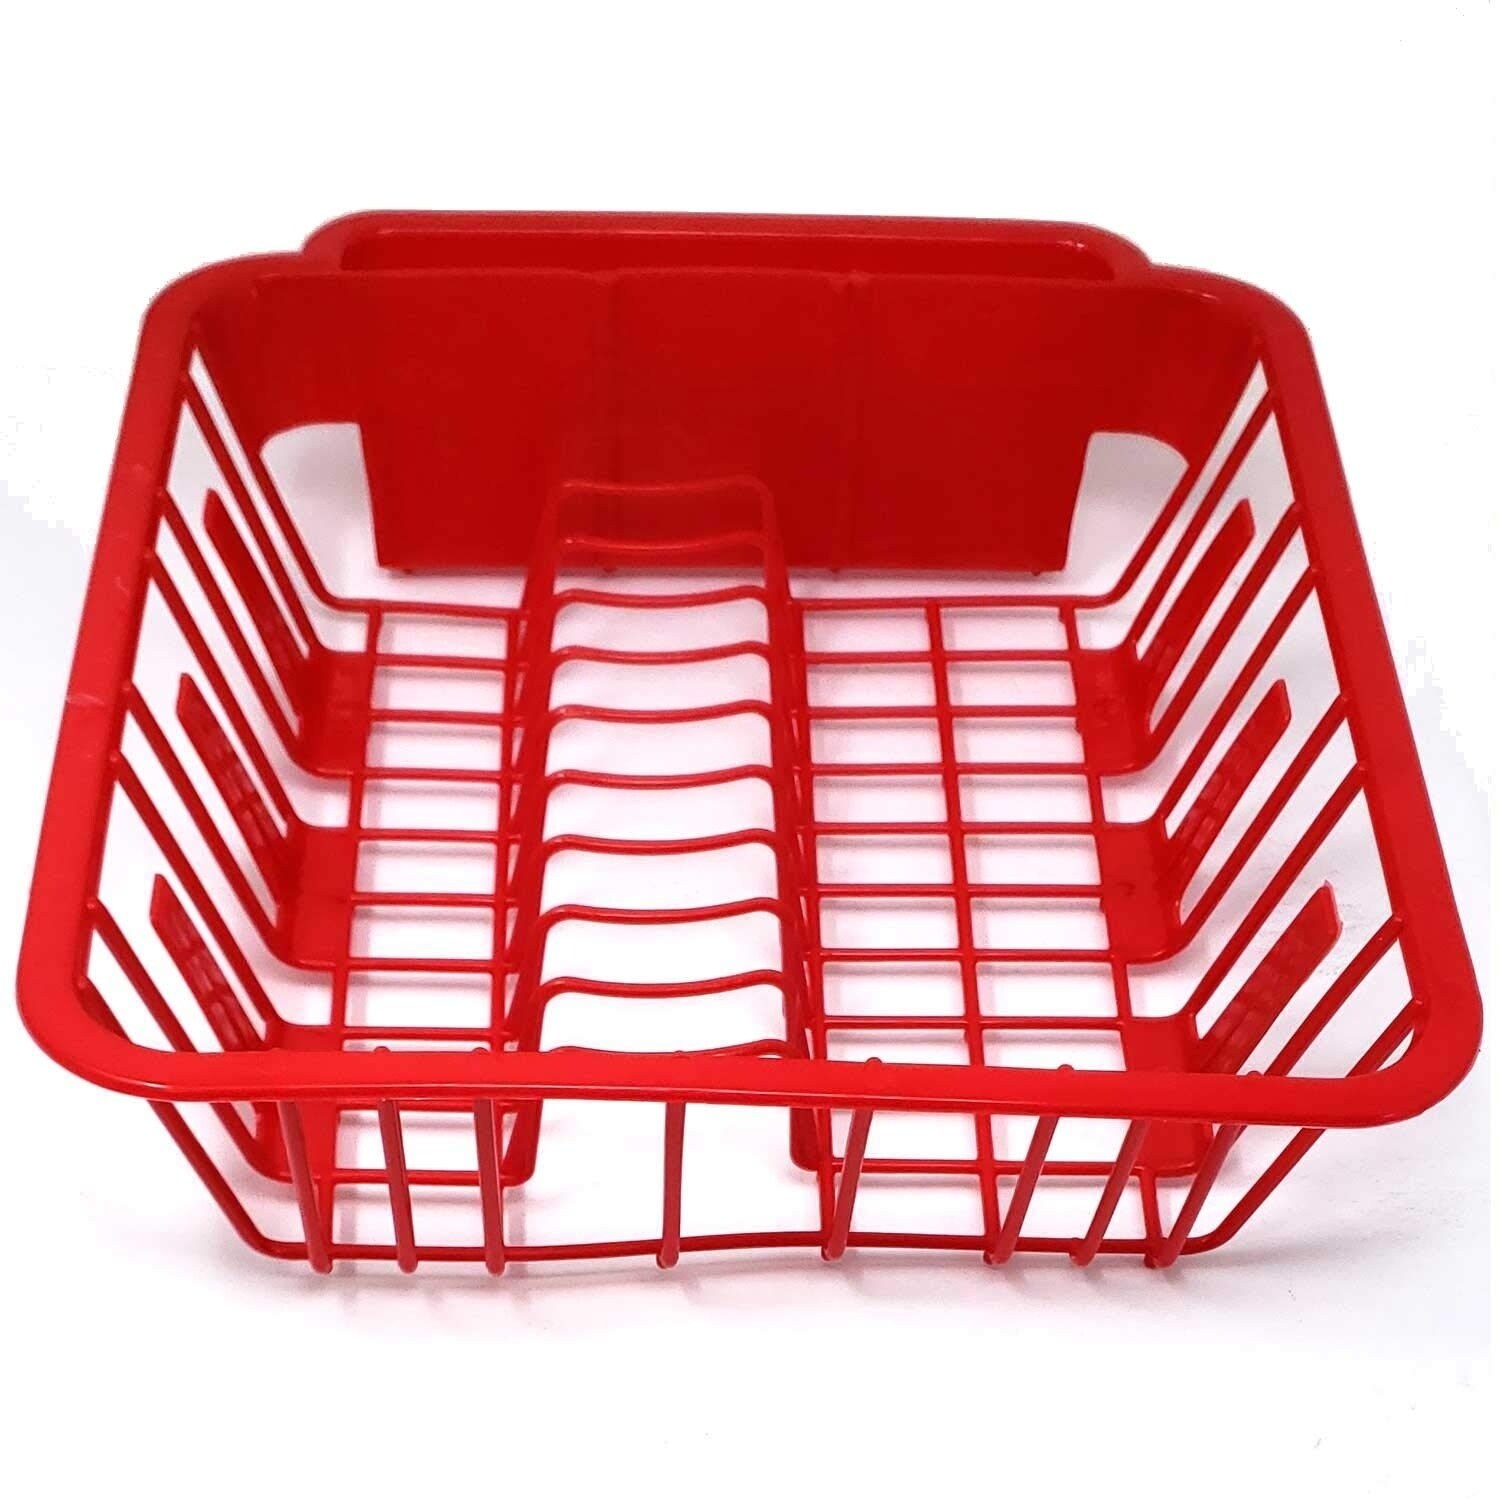 https://ak1.ostkcdn.com/images/products/27104118/BPA-Free-Small-Dish-Drainer-Kitchen-Sink-Drying-Rack-With-Cup-Spoon-Holders-558fa088-4724-4b7d-afc2-a1ae287409c7.jpg